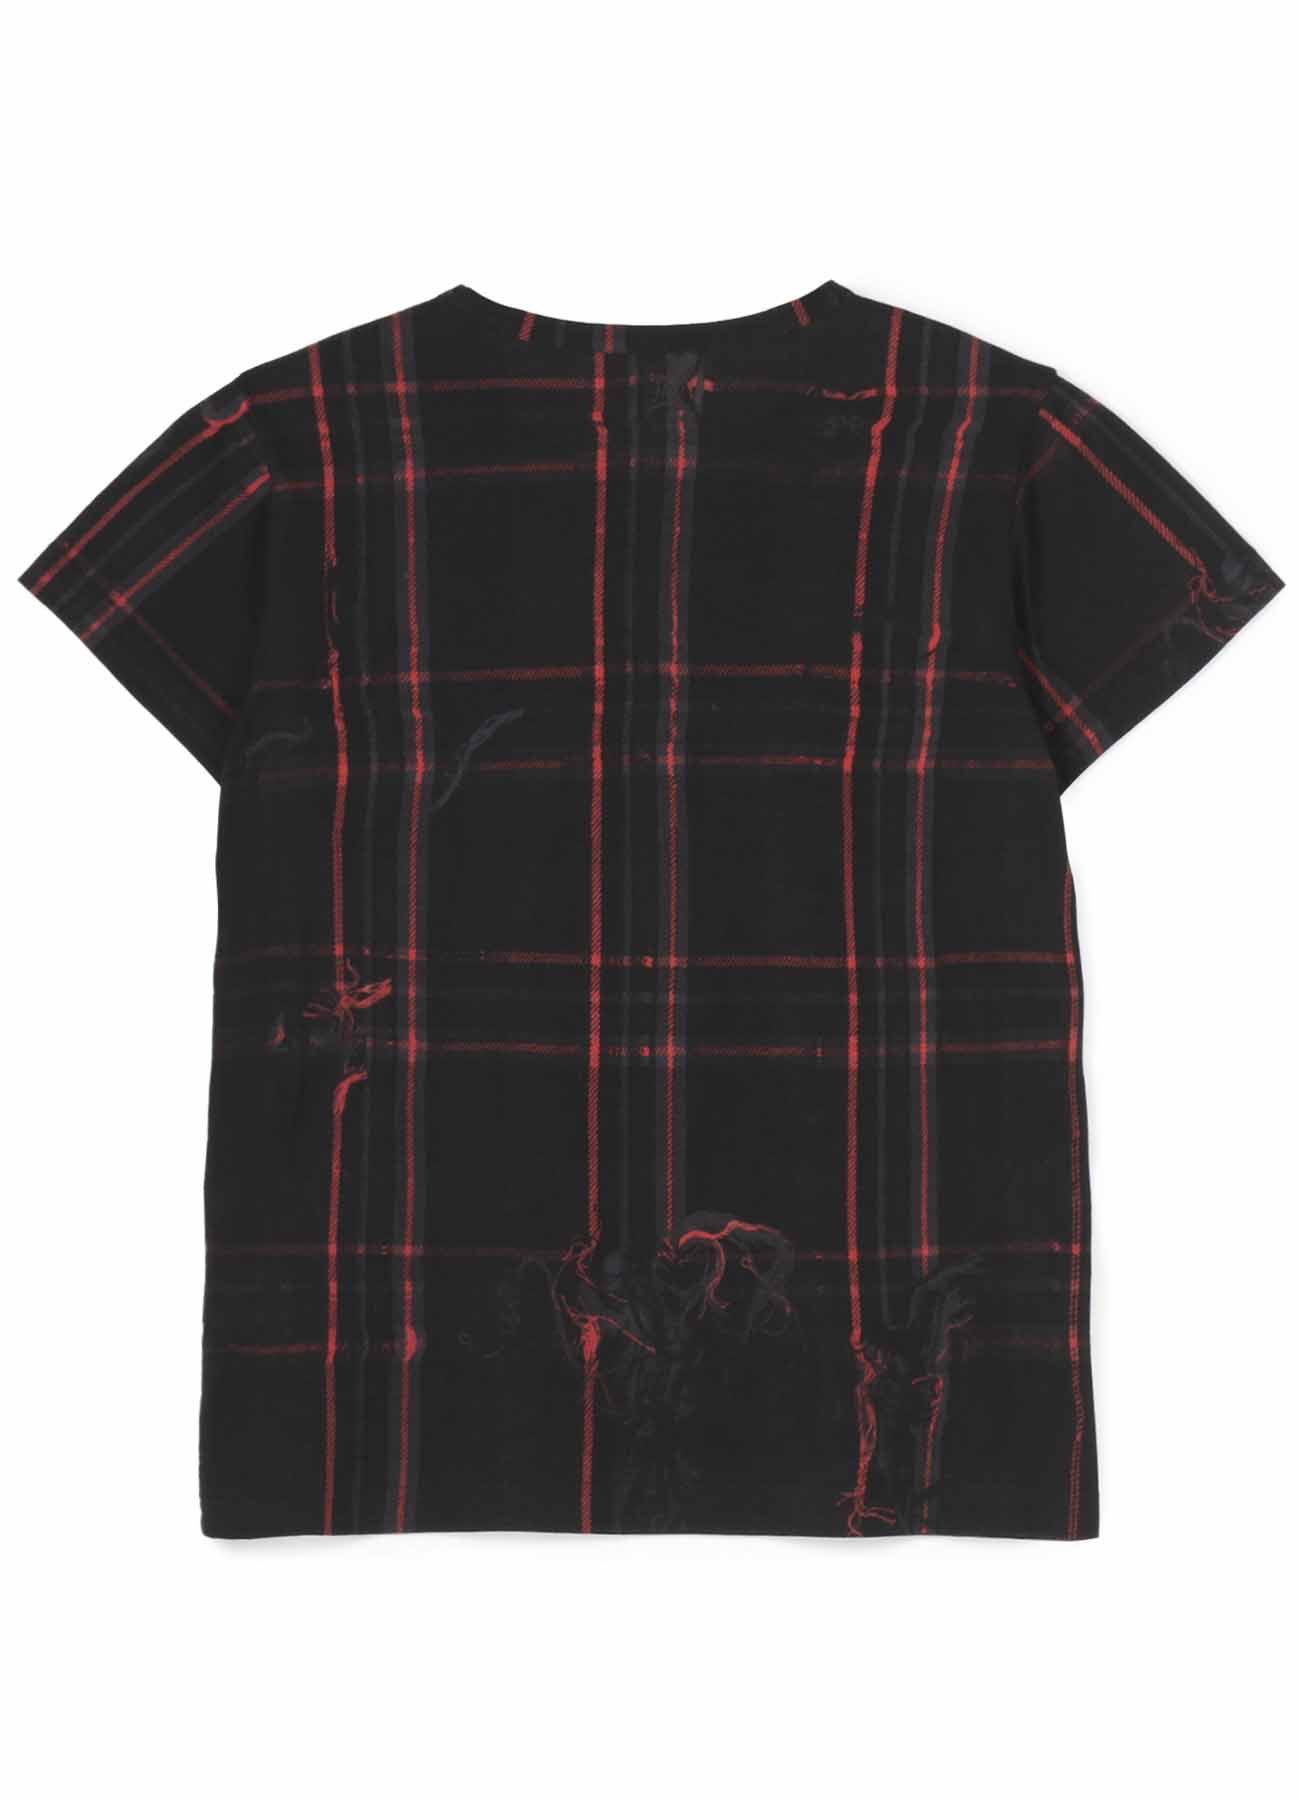 TWISTED CHECK ROUND NECK SHORT SLEEVE